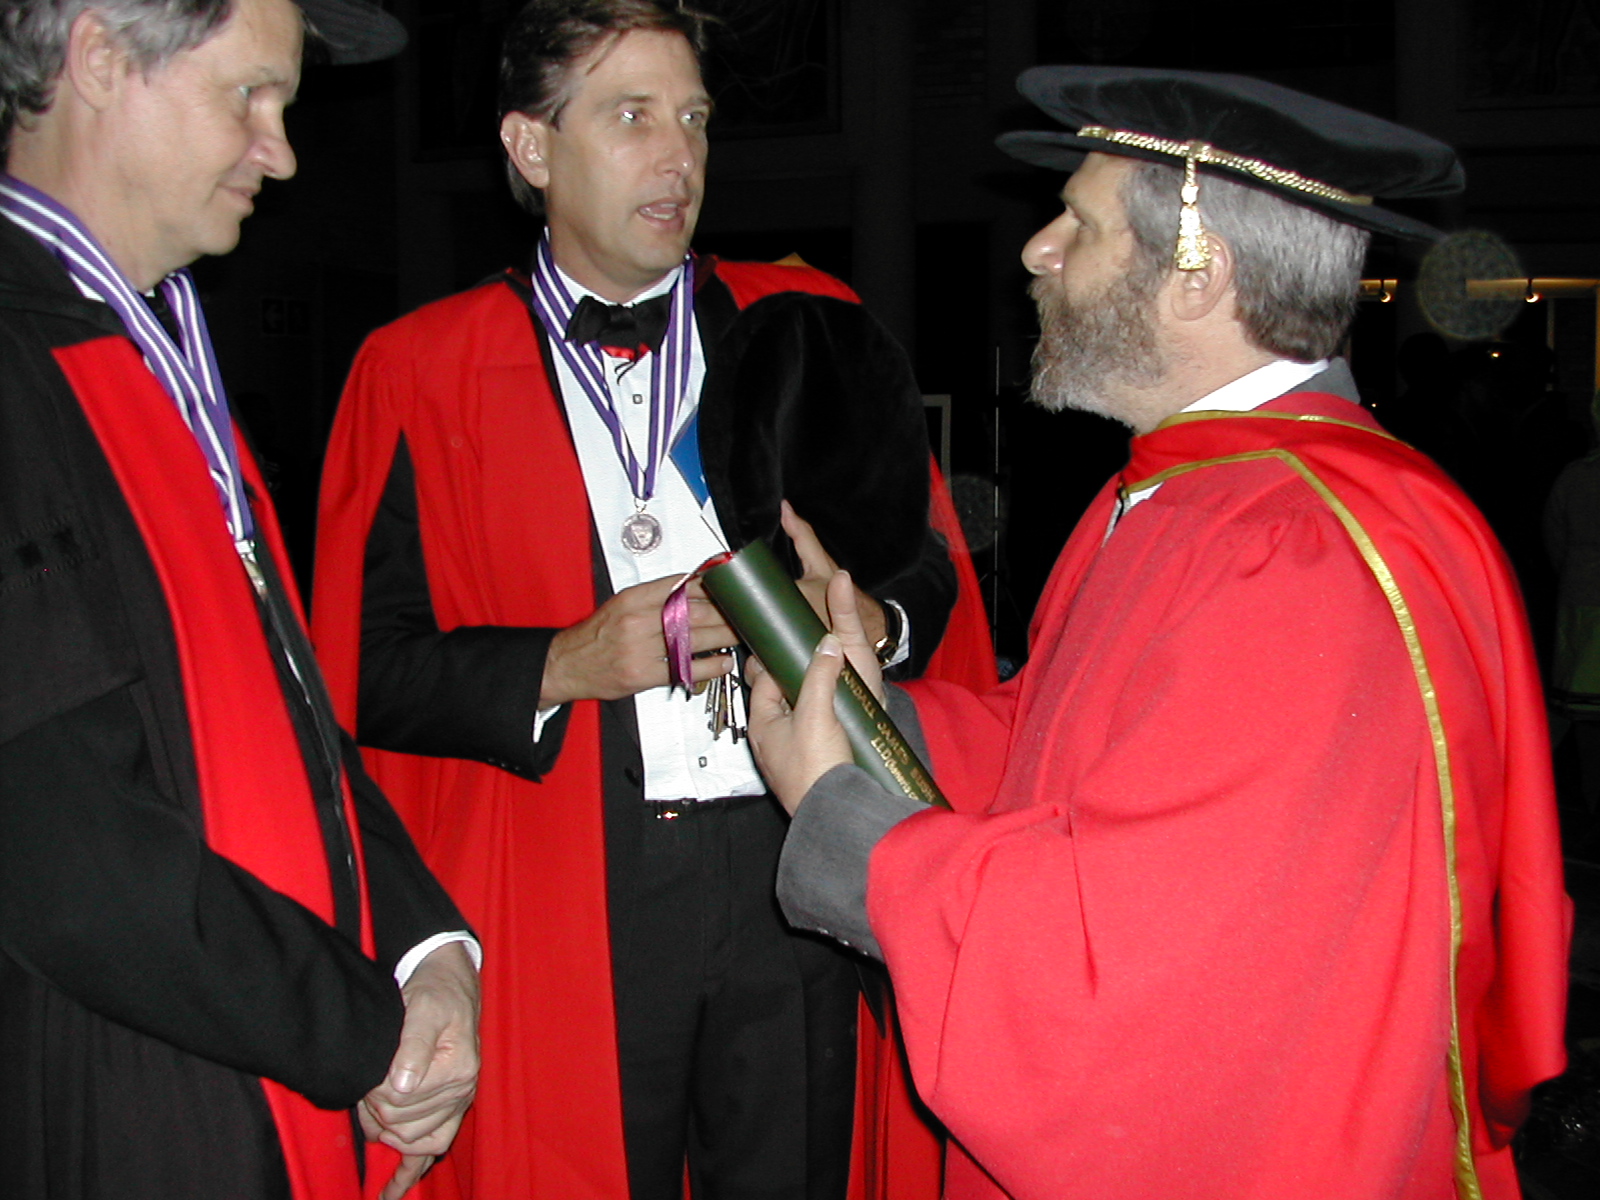 Pat Terry, Peter Clayton and Randy Bush in discussion in 2002, when Randy Bush was awarded an Honorary Doctorate by Rhodes University. Image: Supplied / François Jacot-Guillarmod